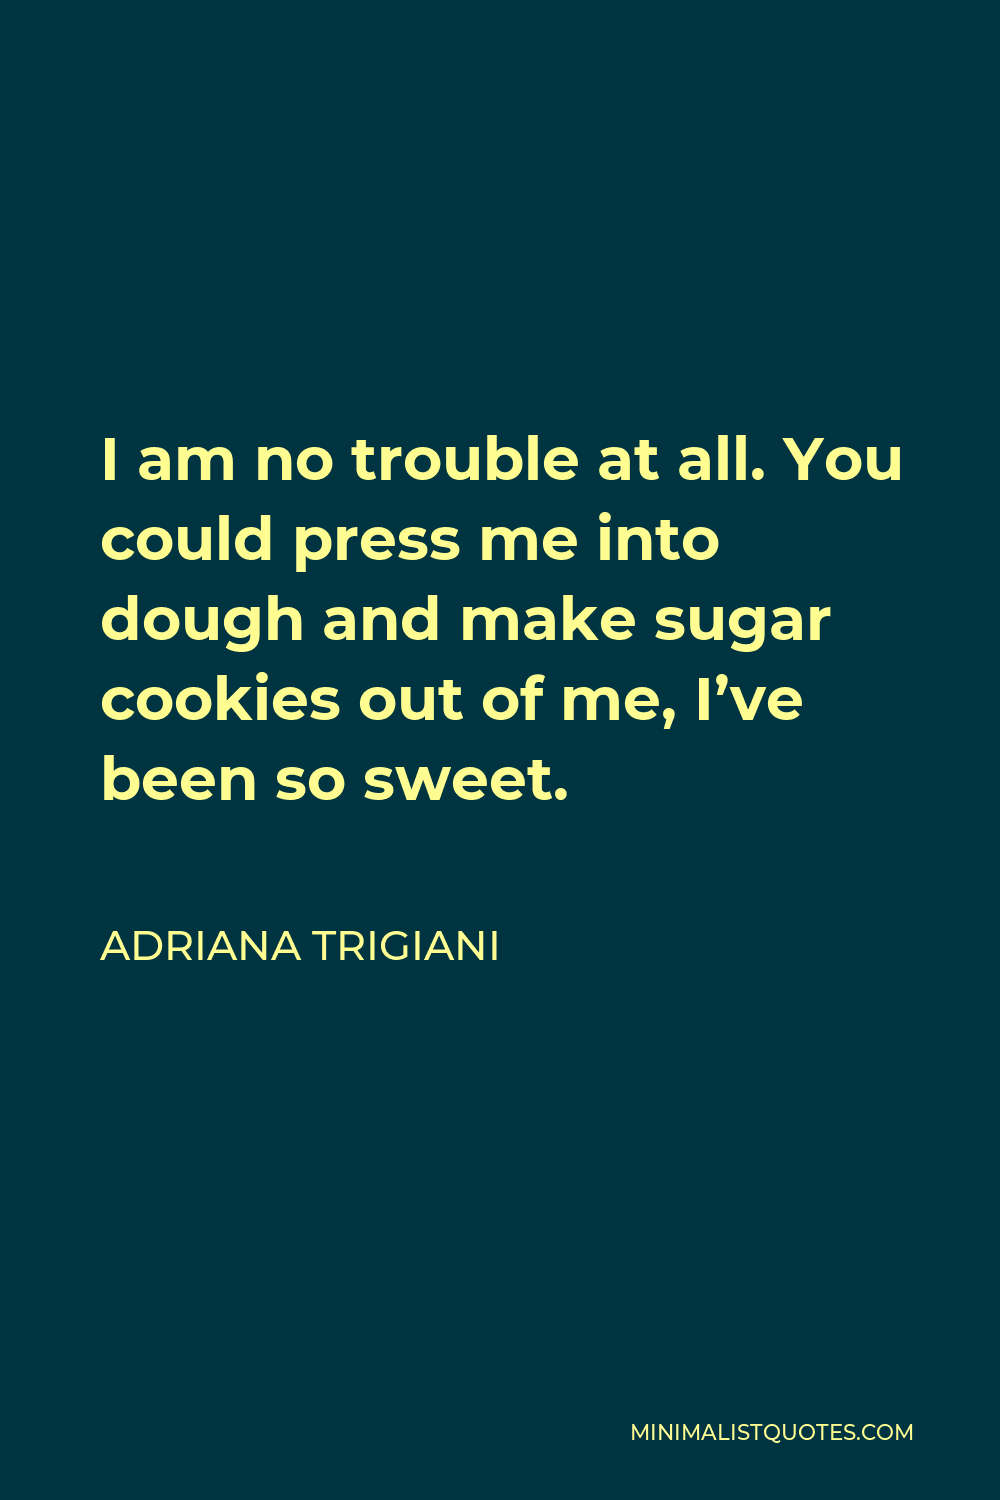 Adriana Trigiani Quote - I am no trouble at all. You could press me into dough and make sugar cookies out of me, I’ve been so sweet.